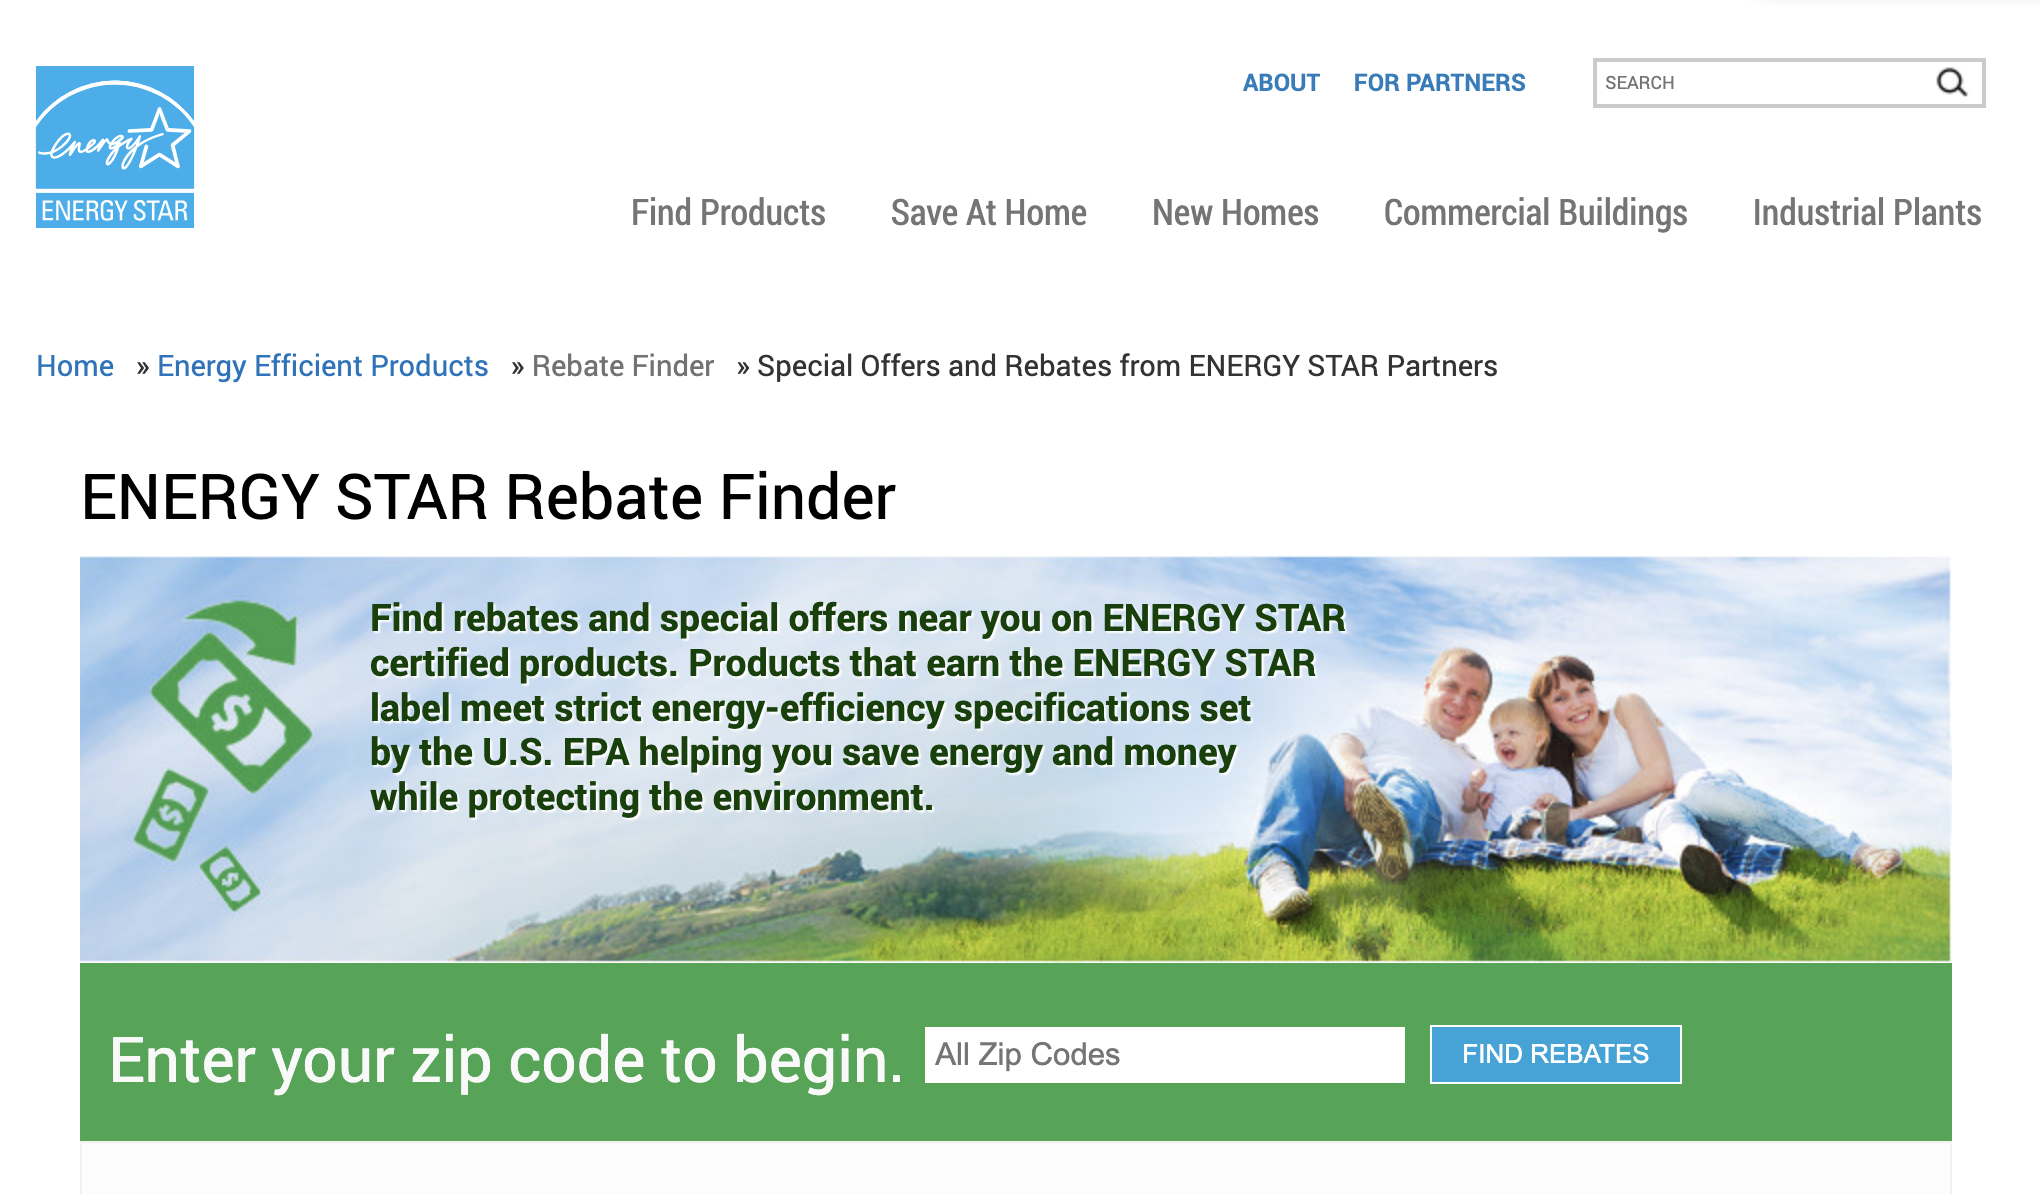 Energy STAR rebate finder and product offers